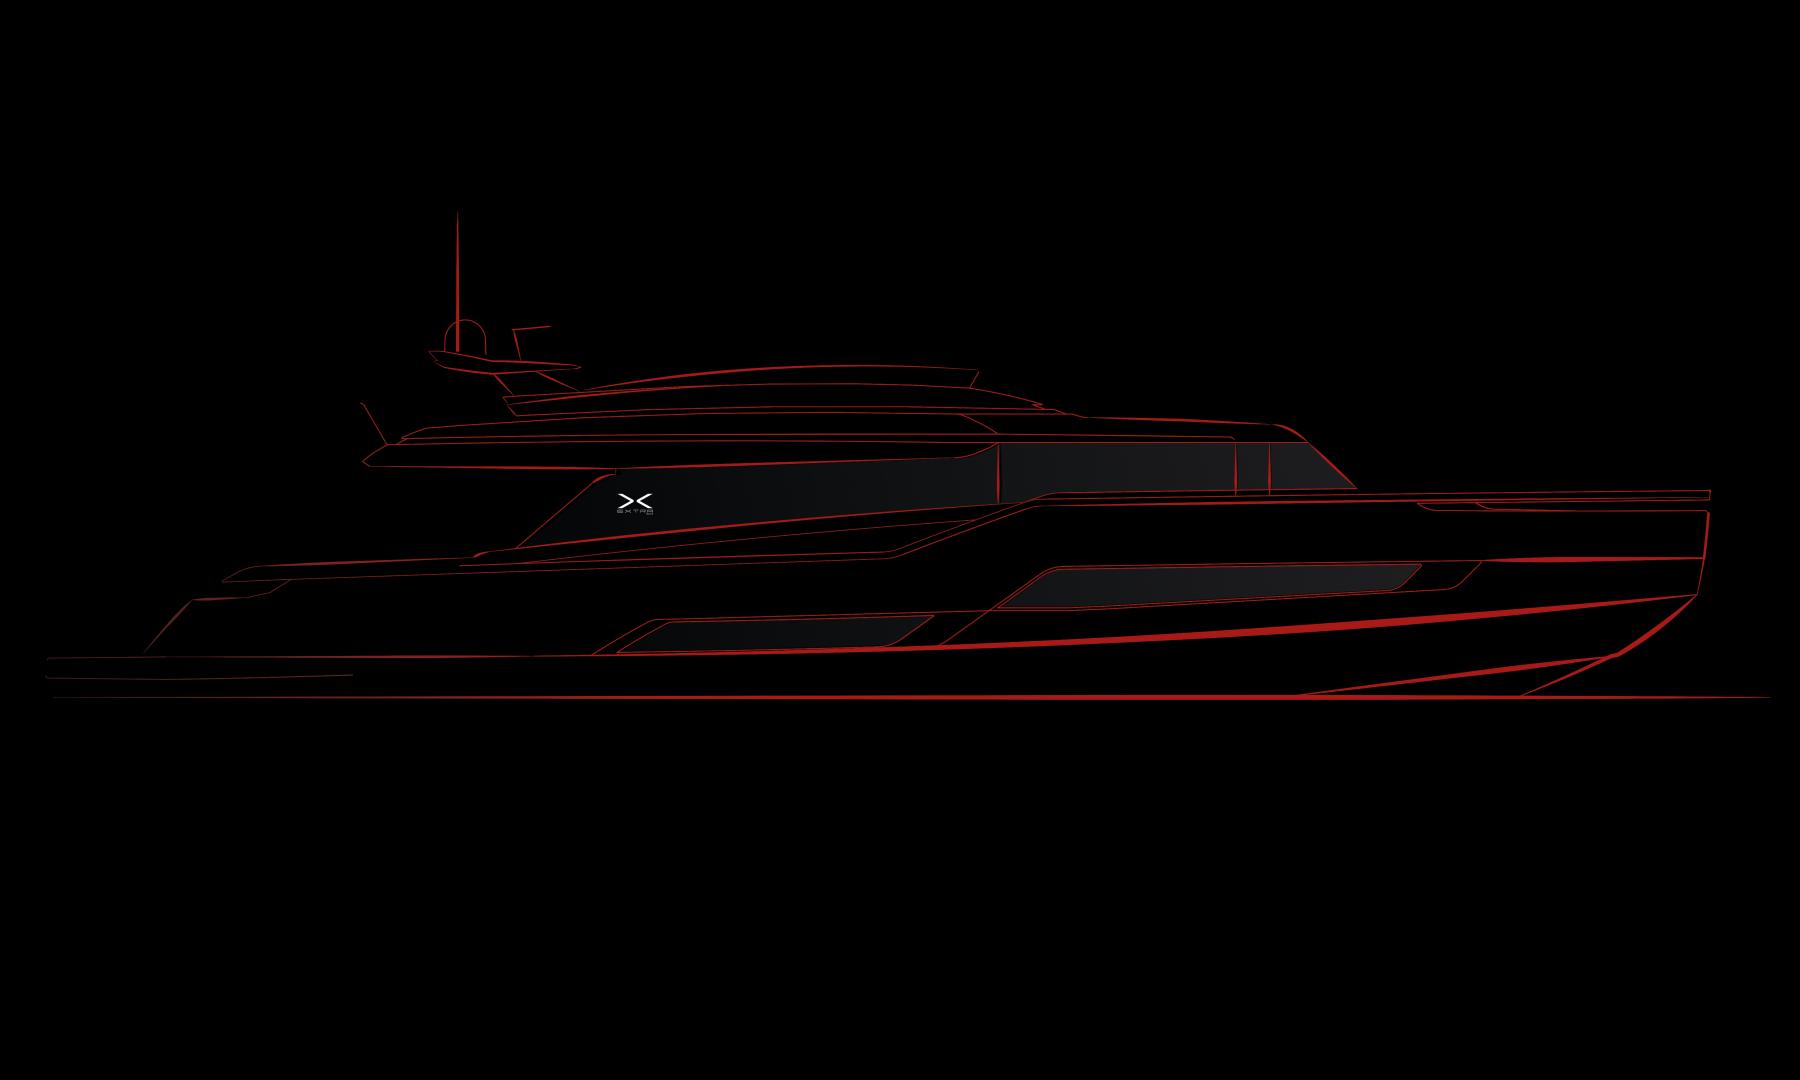 Palumbo Superyachts: Extra X99, sold the second unit